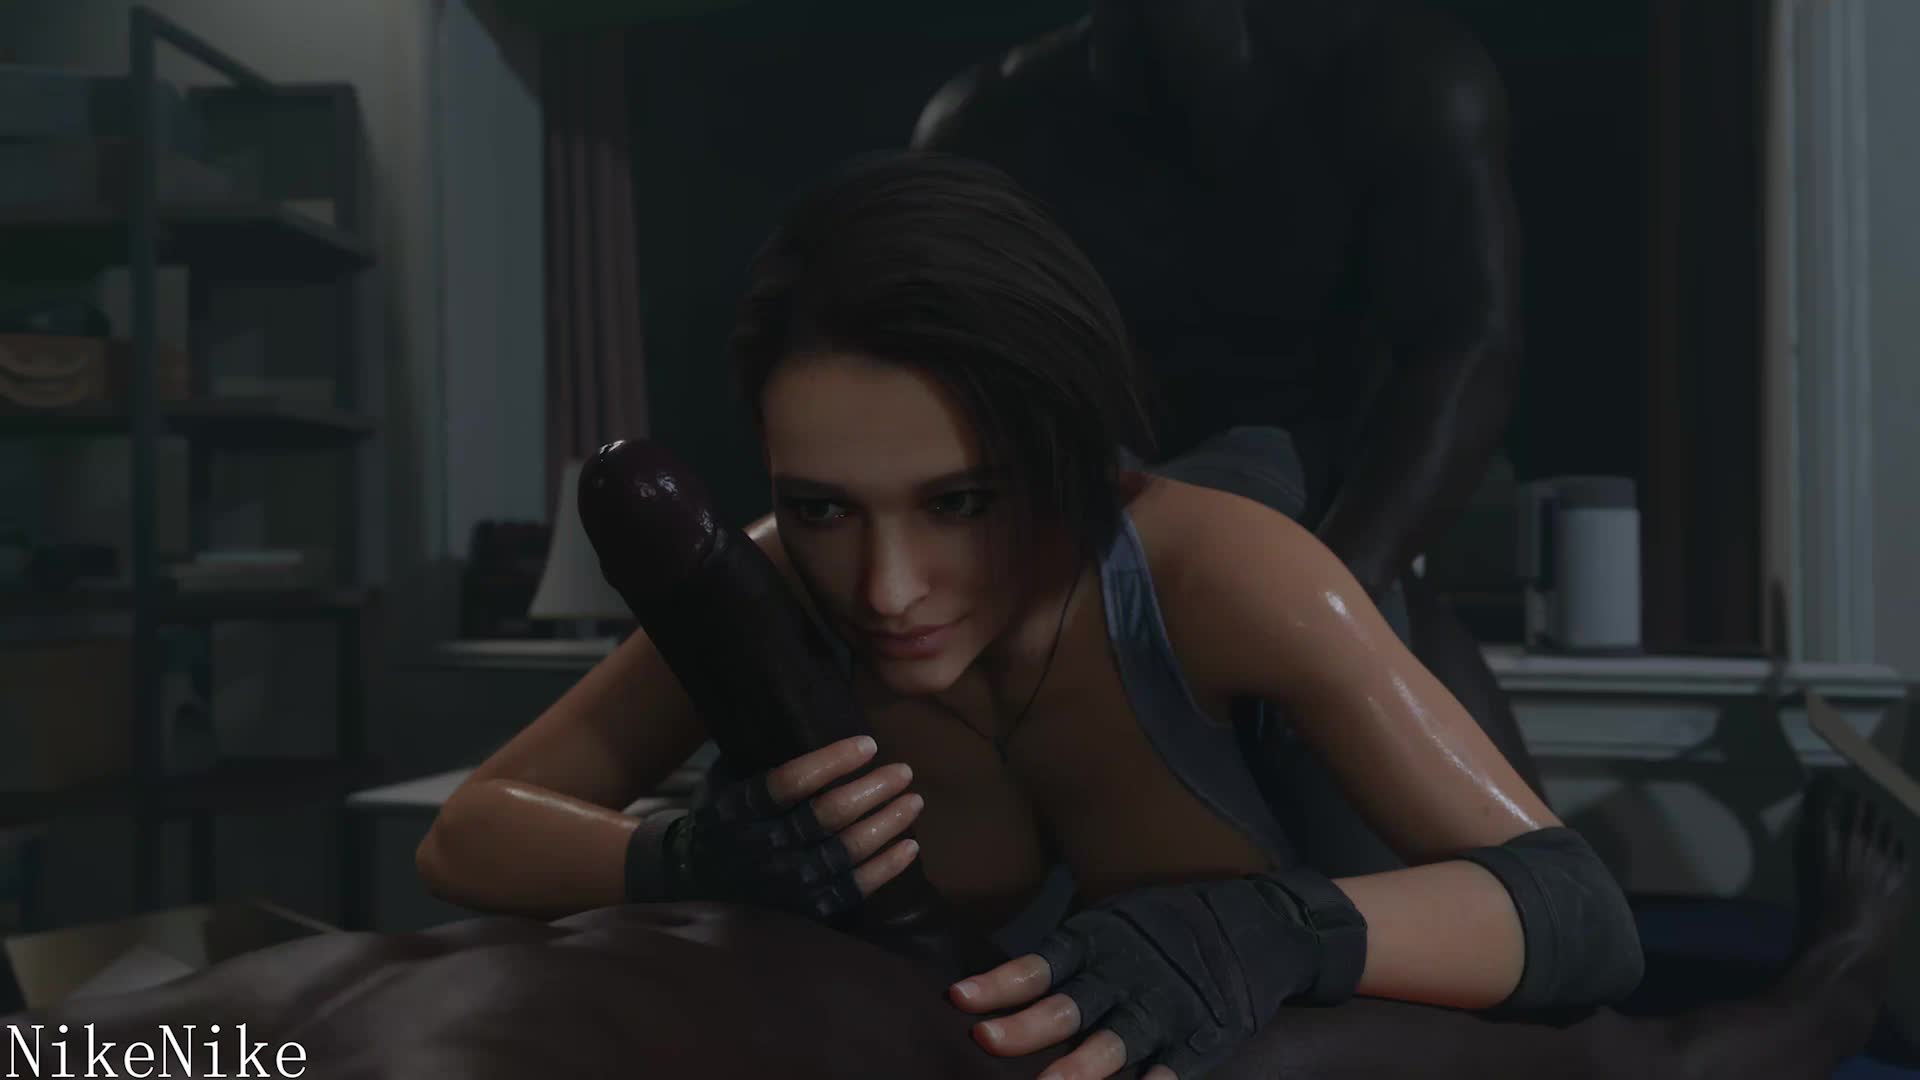 Jill Valentine Gives Handjob And Gets Fucked In Doggy Style Together – Resident Evil 3 NSFW animation thumbnail